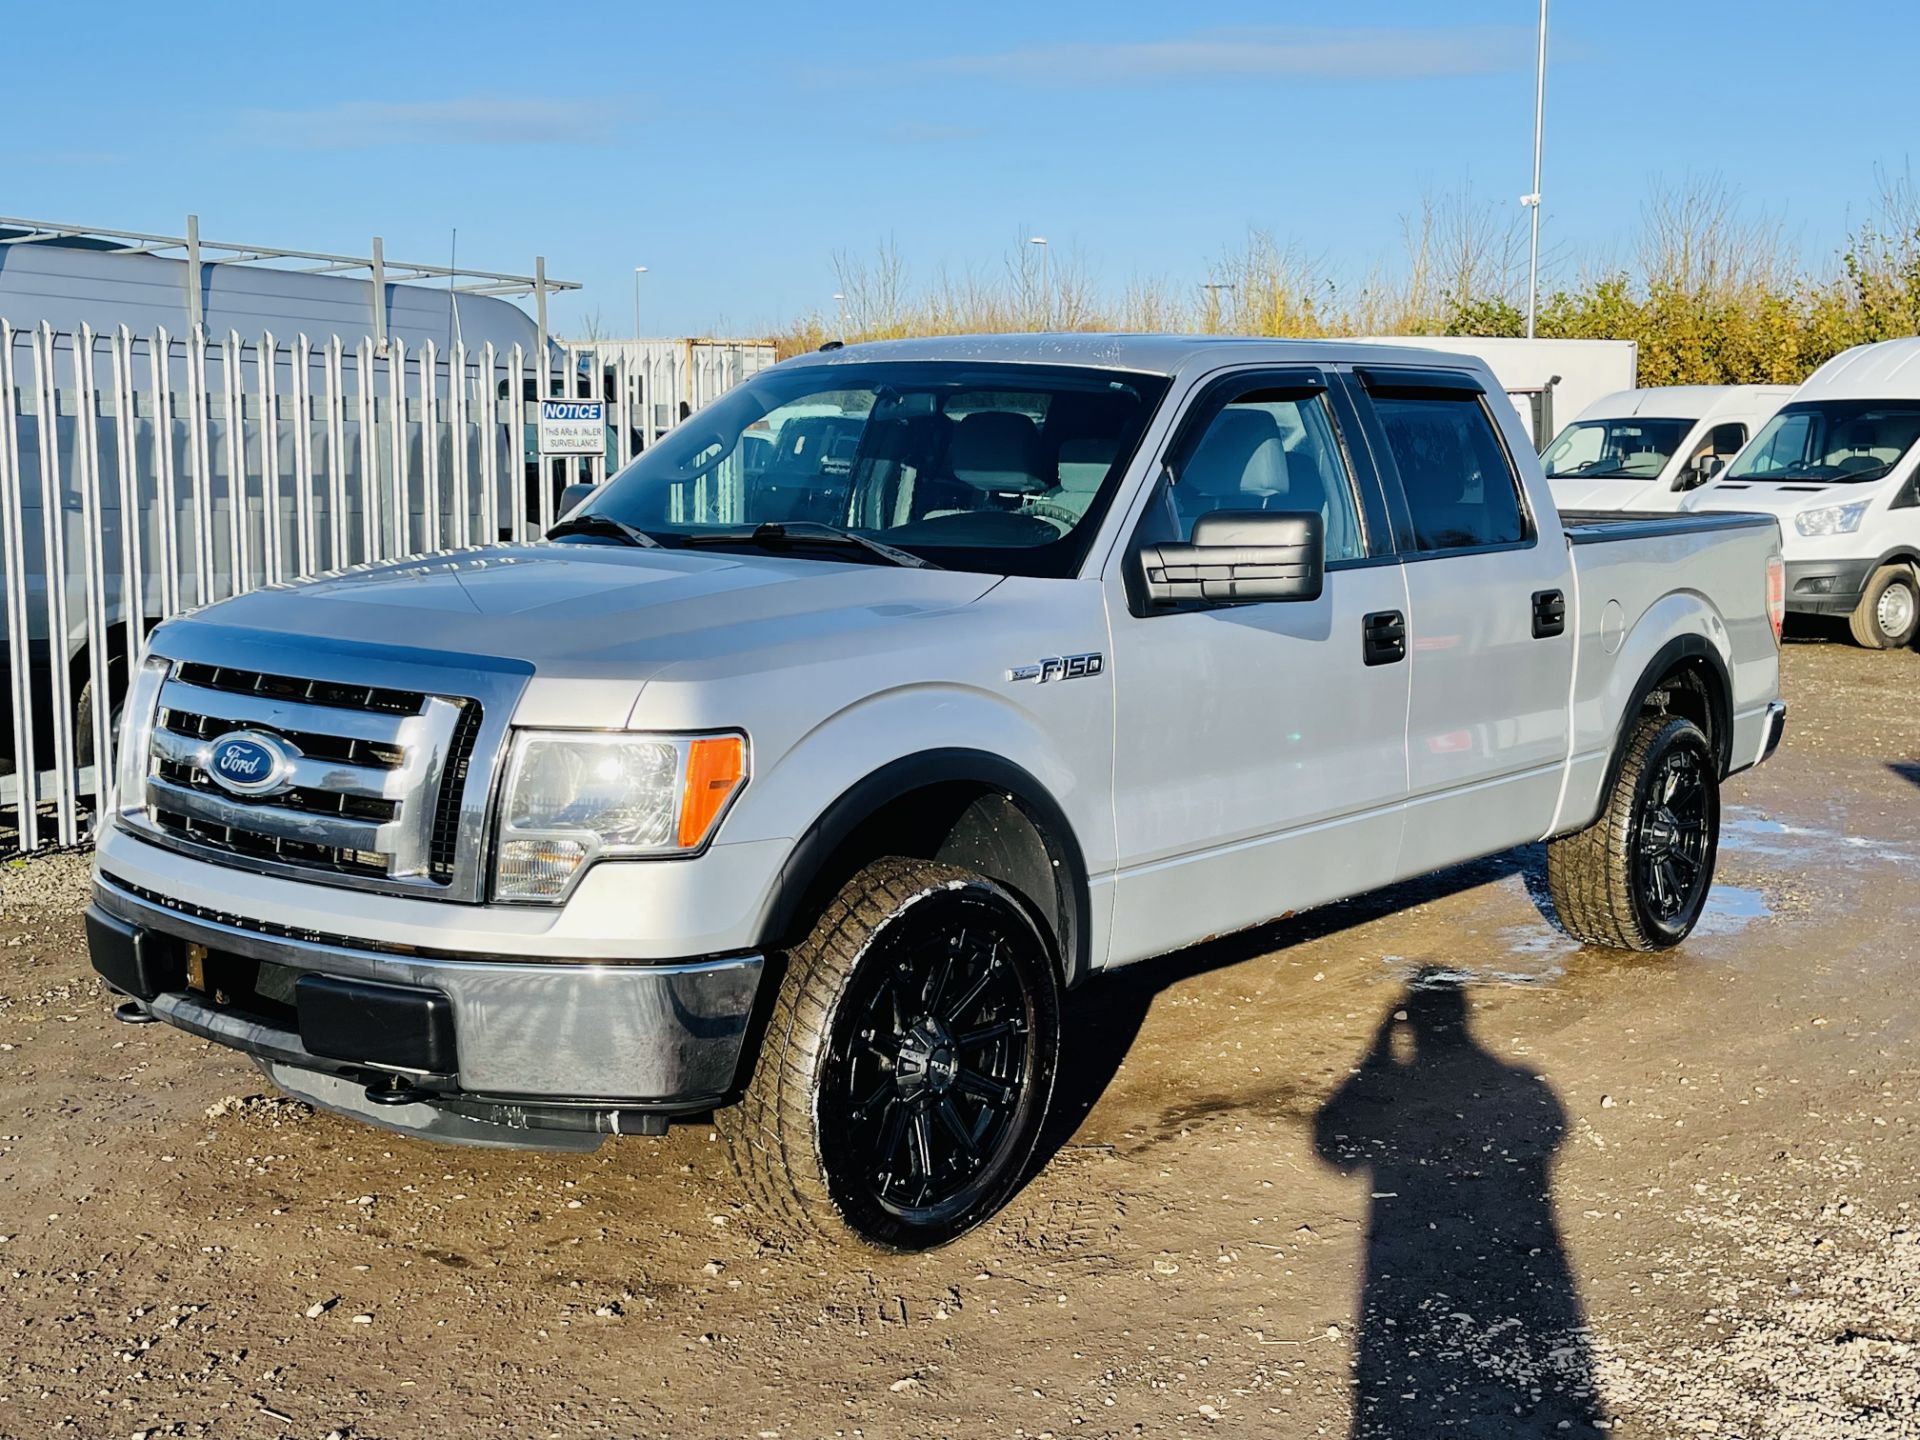 Ford F-150 5.0L V8 XLT Edition 4WD Super-Crew '2011 Year' A/C - Cruise Control - Chrome Pack - Image 4 of 23